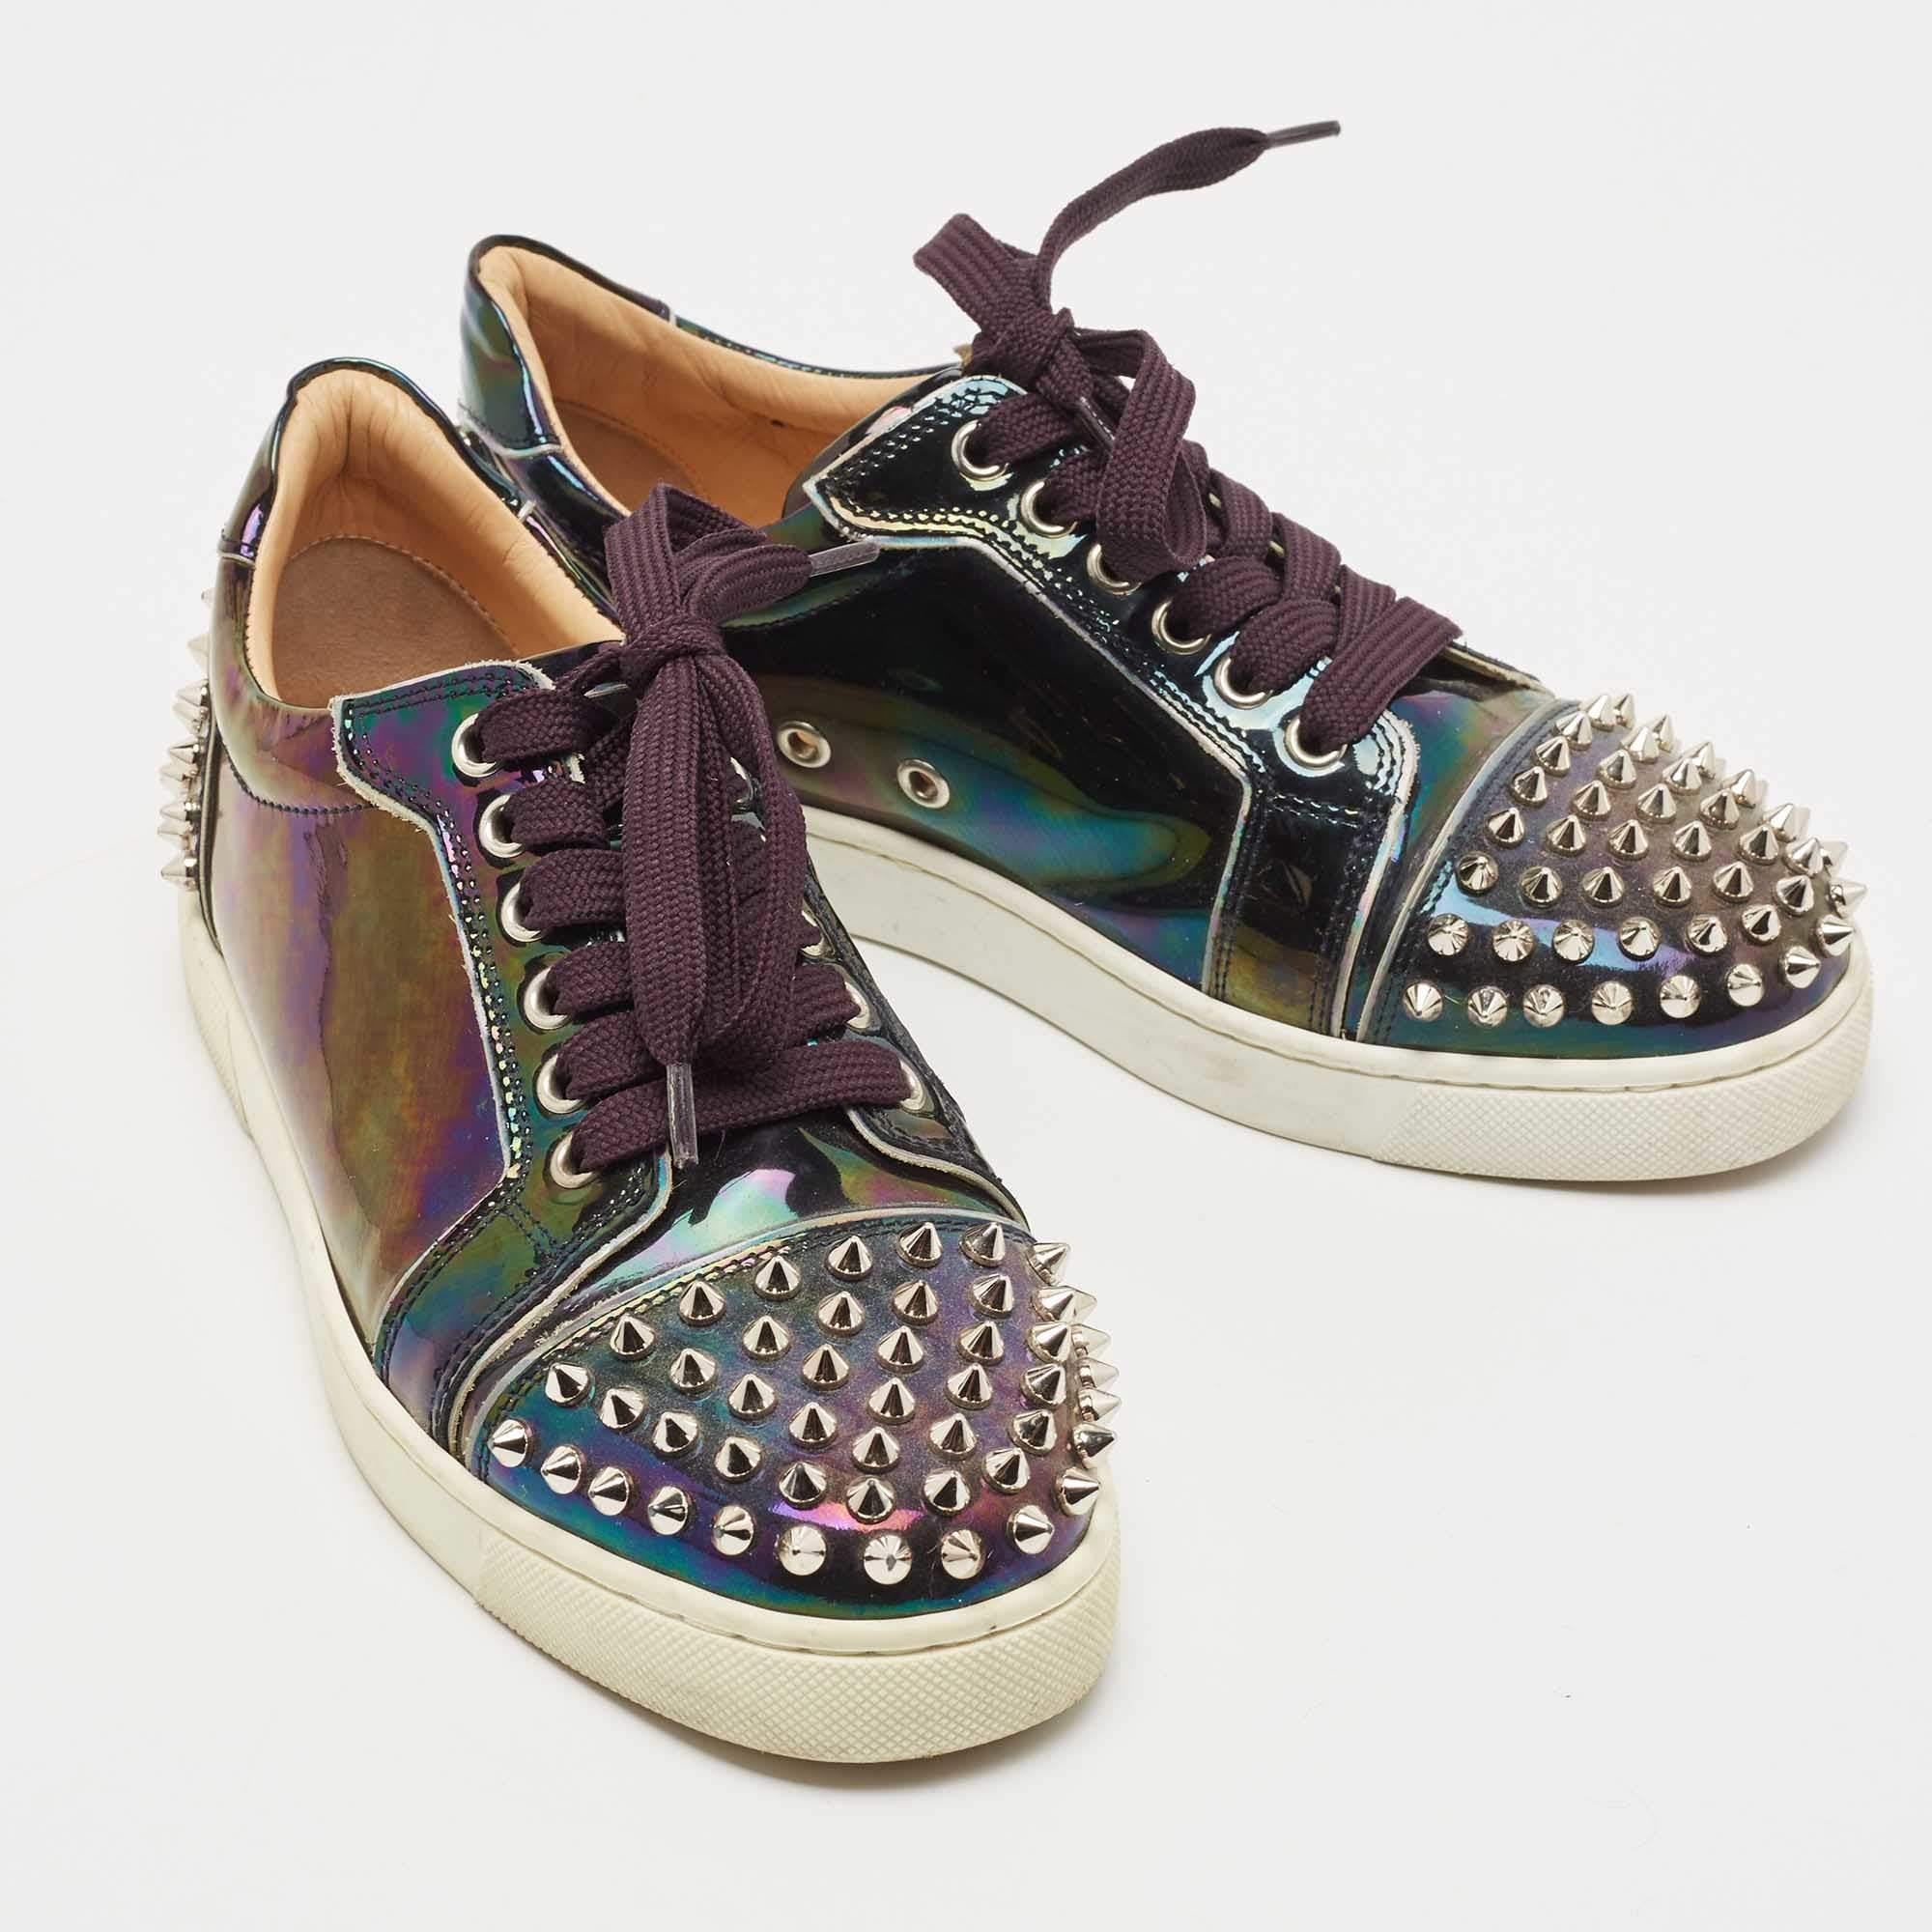 Women's Christian Louboutin Holographic Patent veira Spike Low Top Sneakers Size 36.5